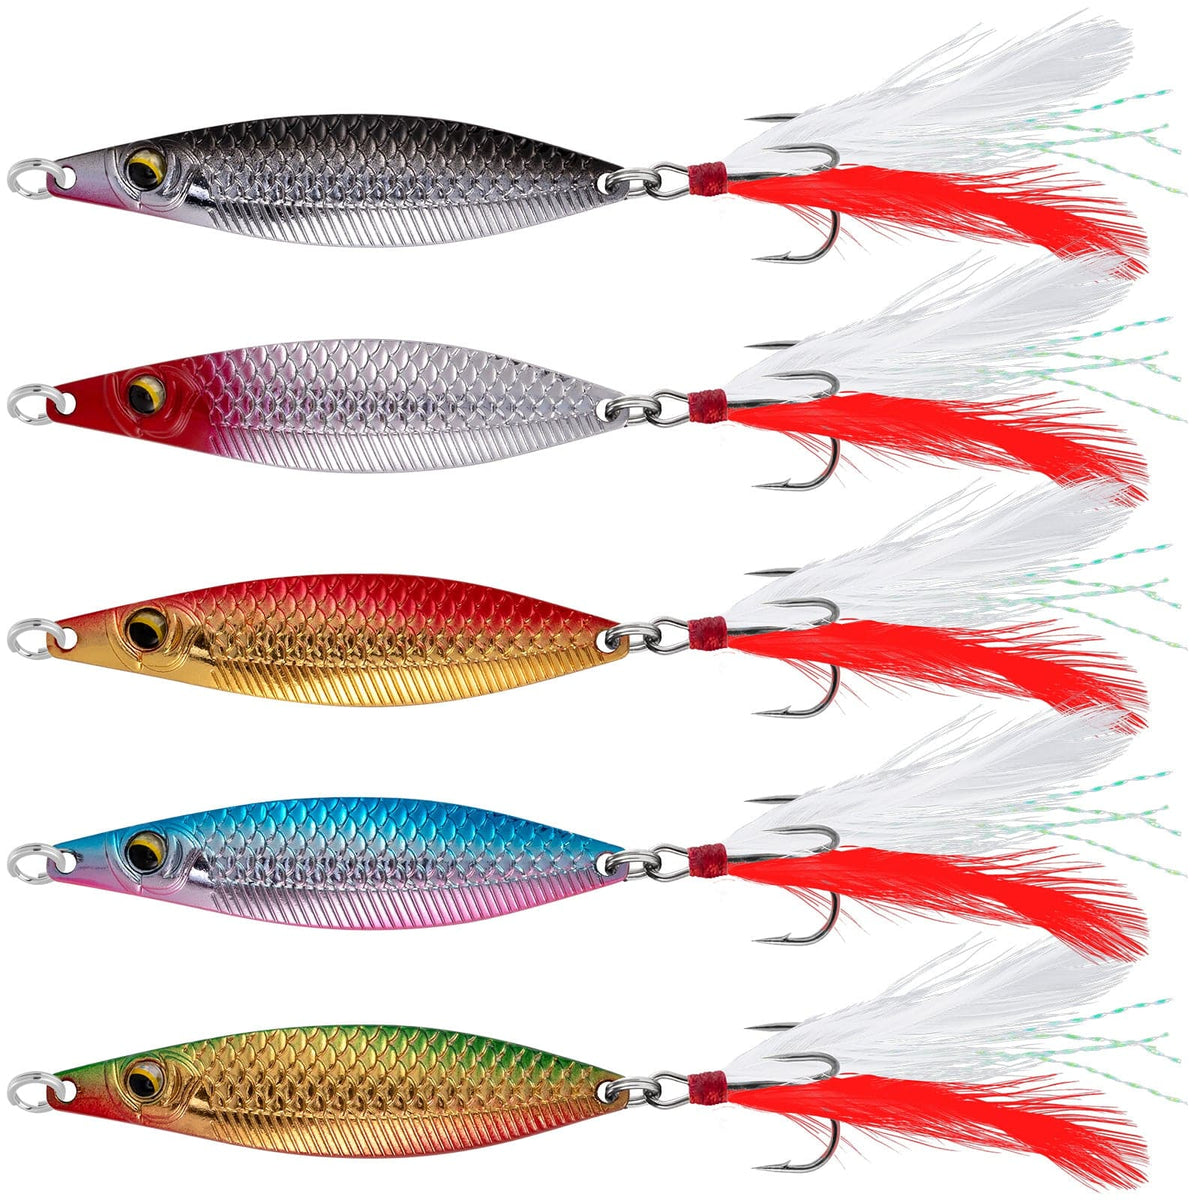 Dr.Fish 5pcs Metal Roostertail Spoon Lures 15/30g